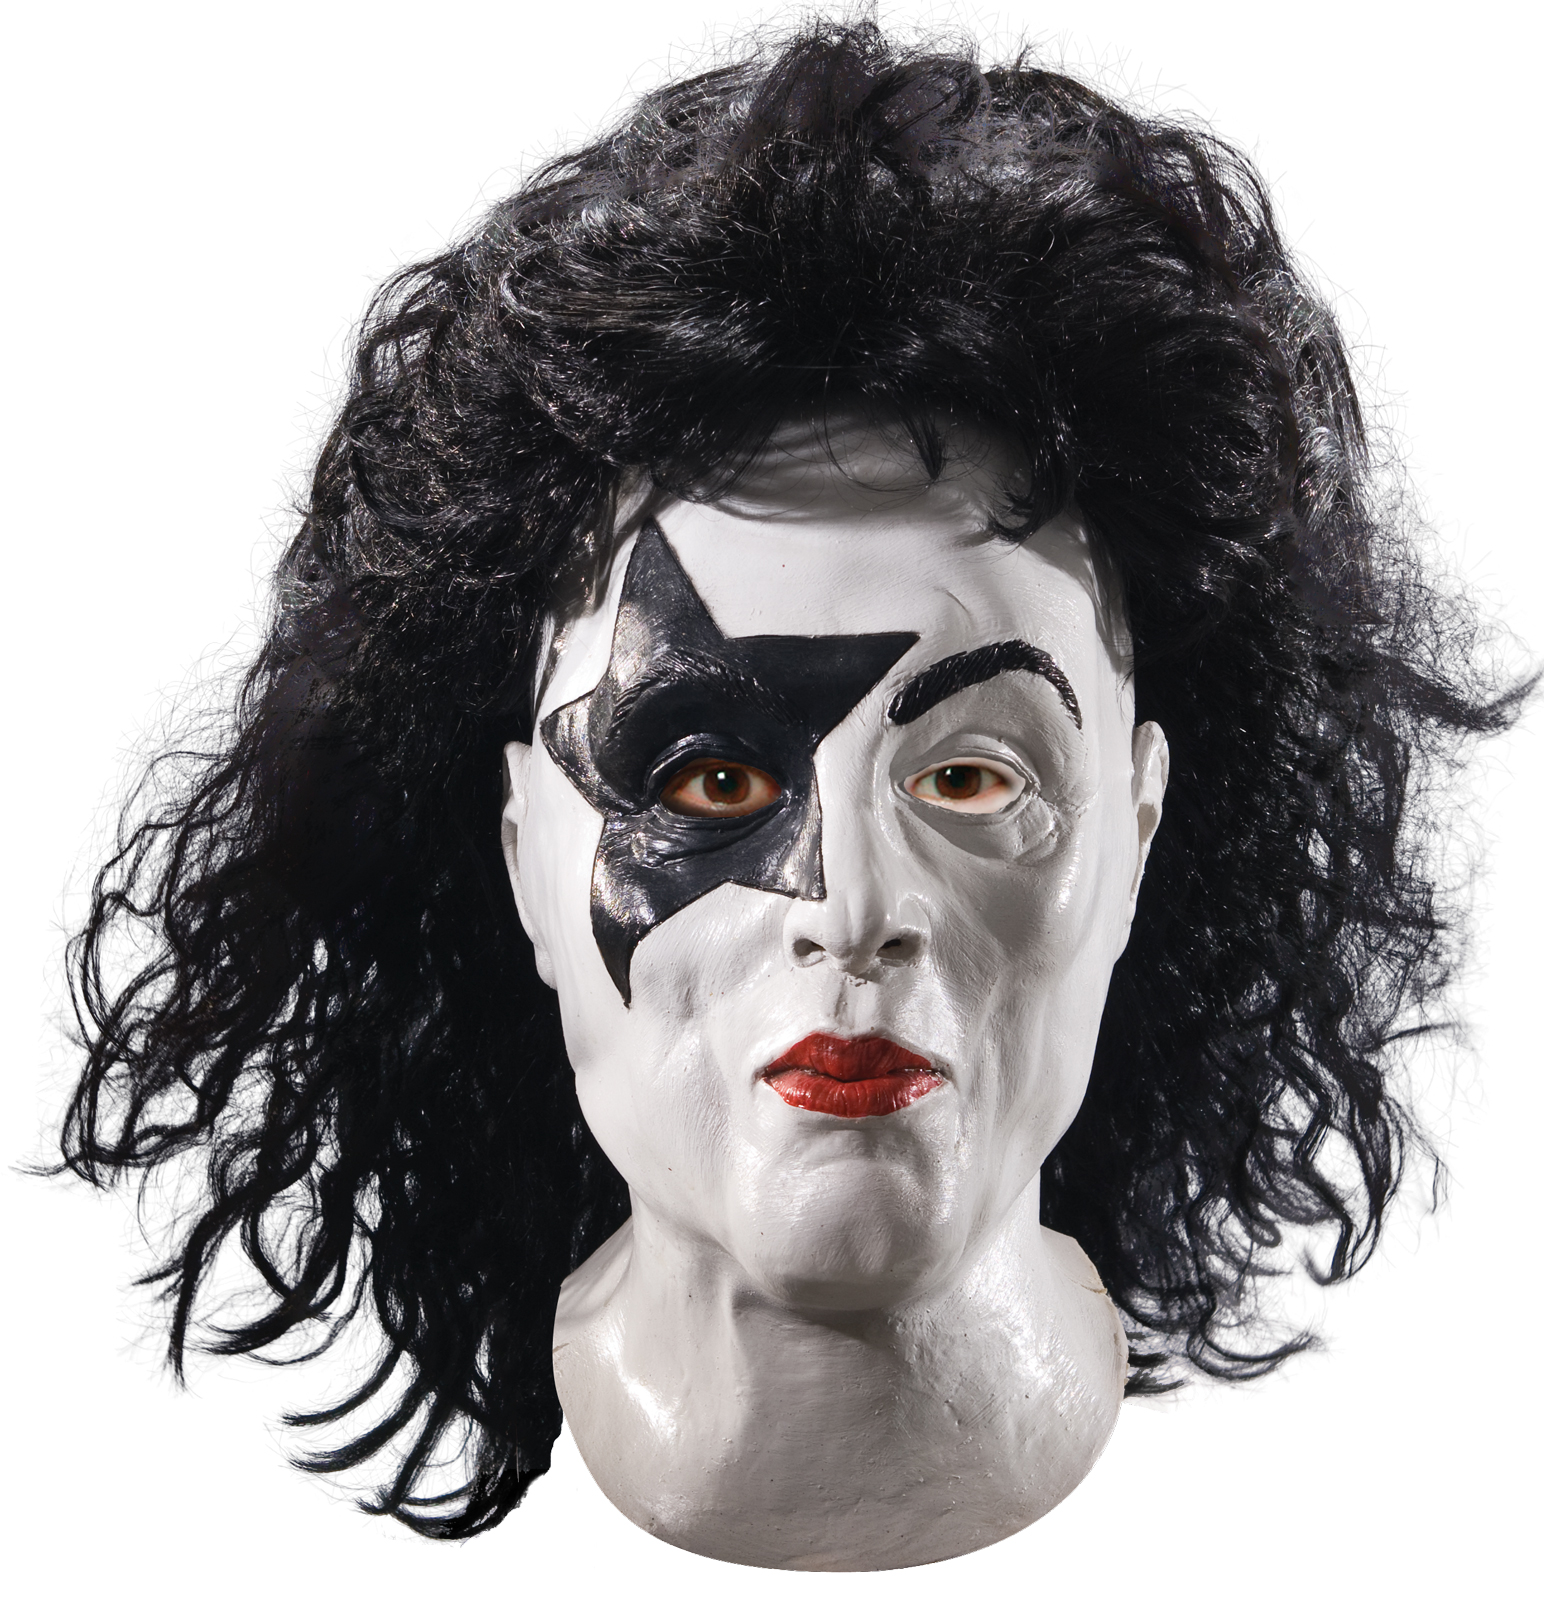 Rubie's Costume Co Women's KISS - Starchild Latex Full Mask With Hair (Adult) - Black/White - One-Size